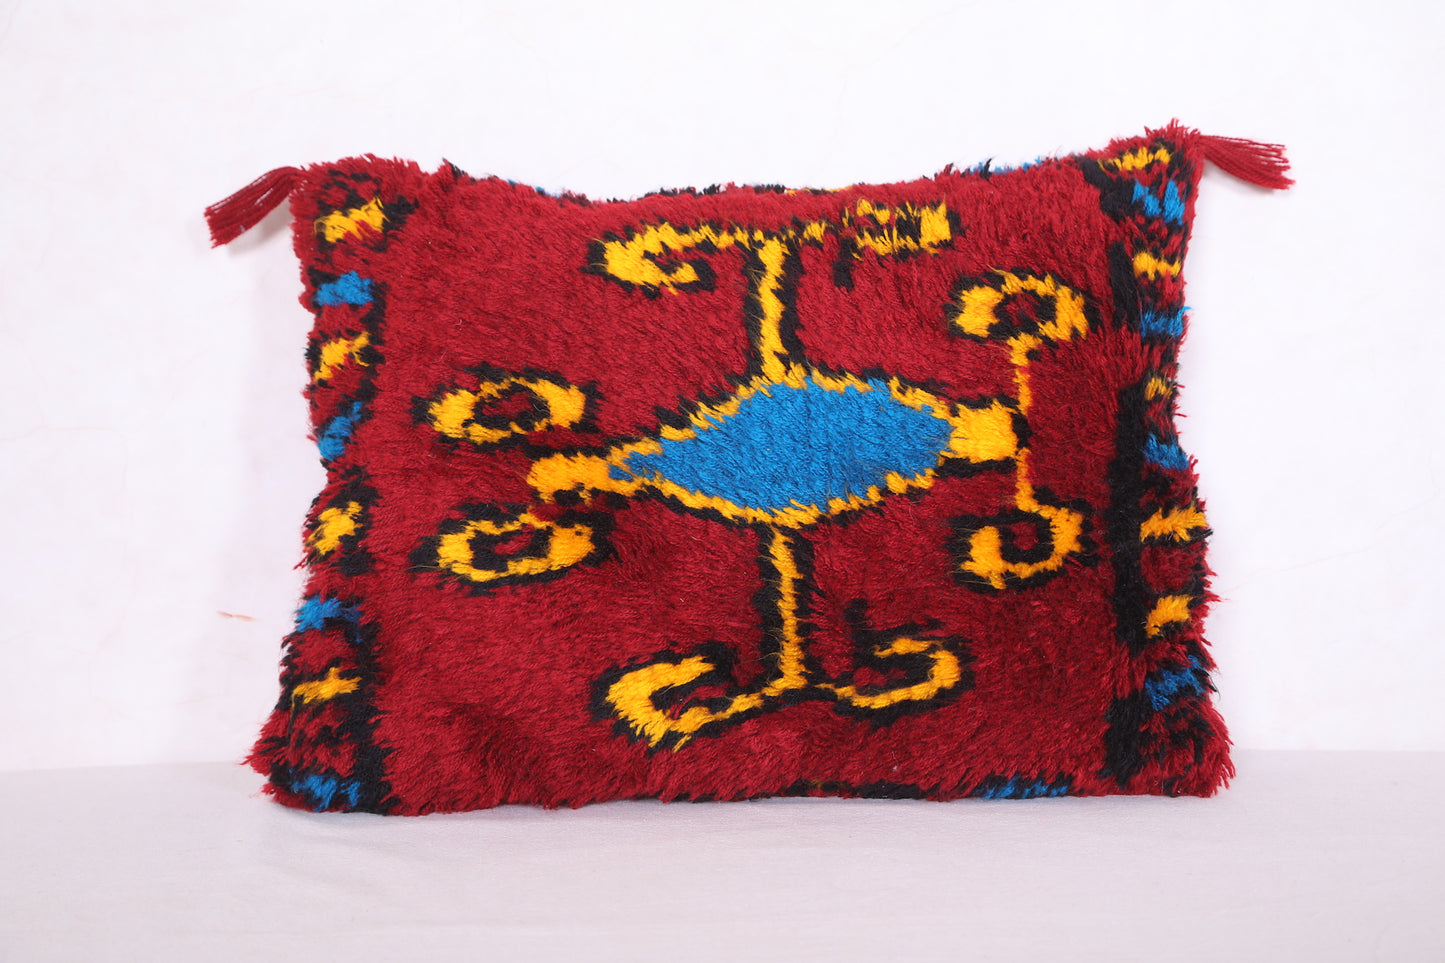 Berber rug shag pillow 19.2 INCHES X 24 INCHES